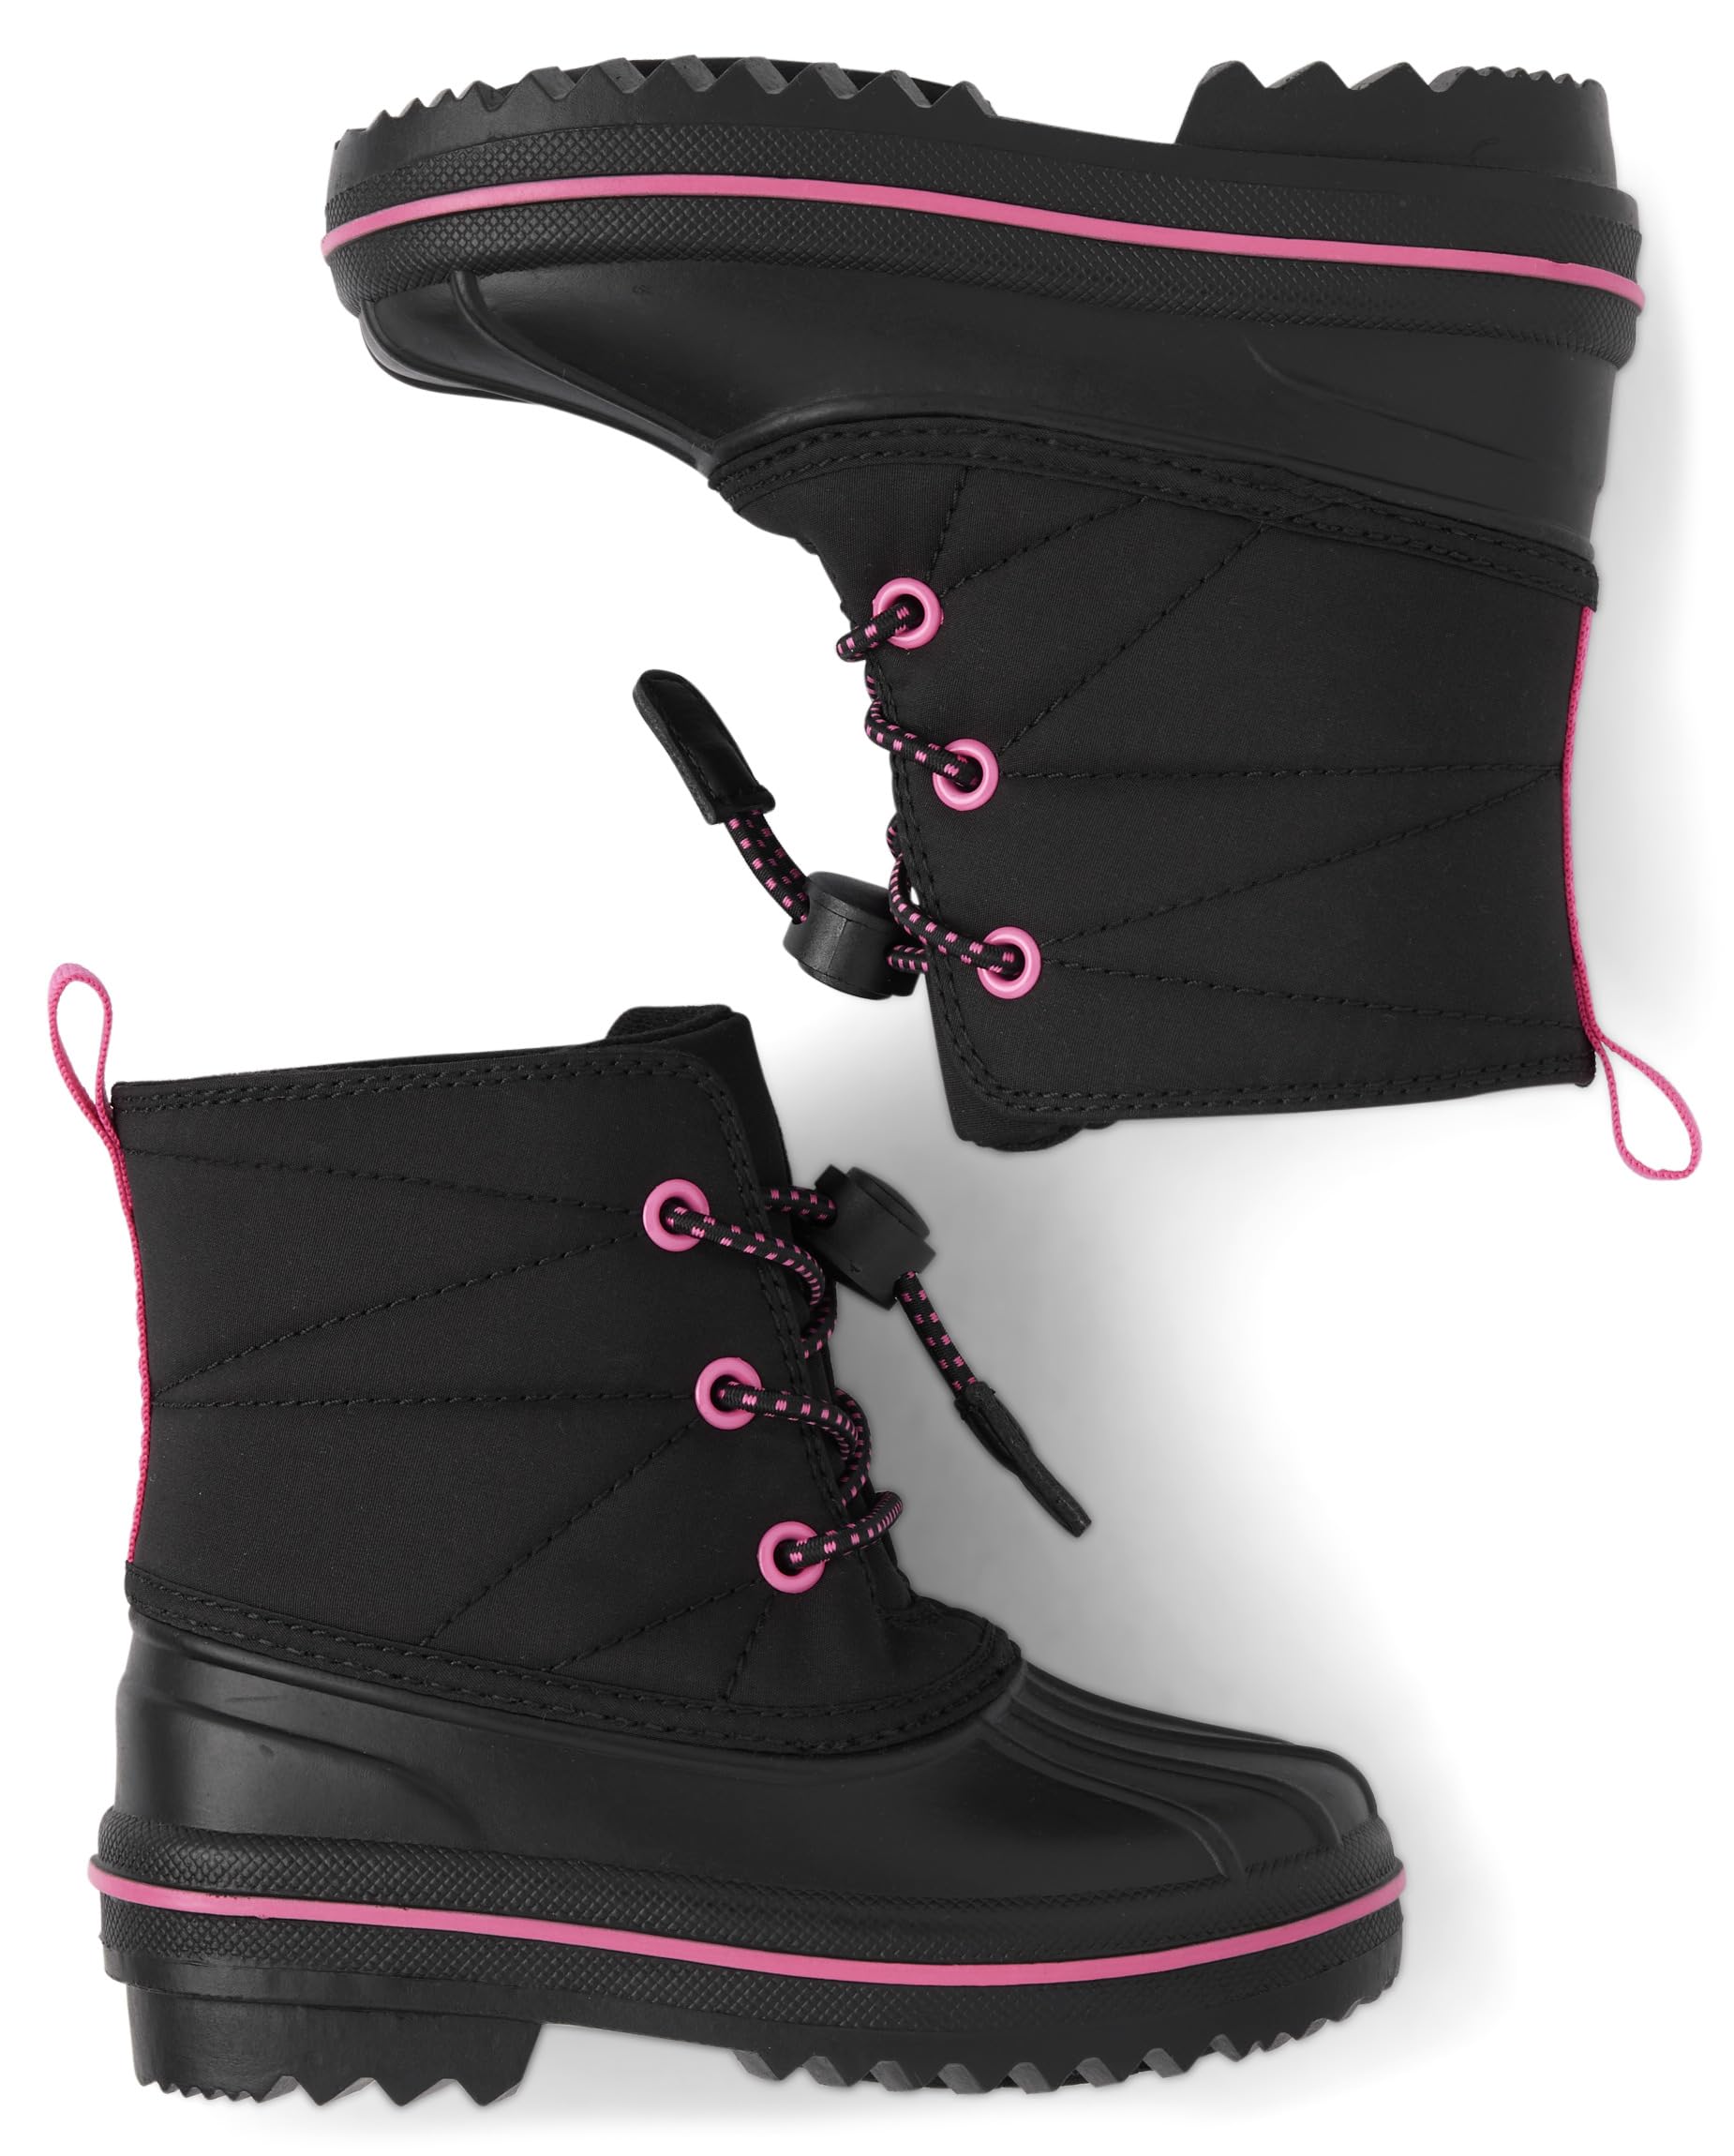 The Children's Place Unisex-Child and Toddler Winter Lace Up Snow Boots